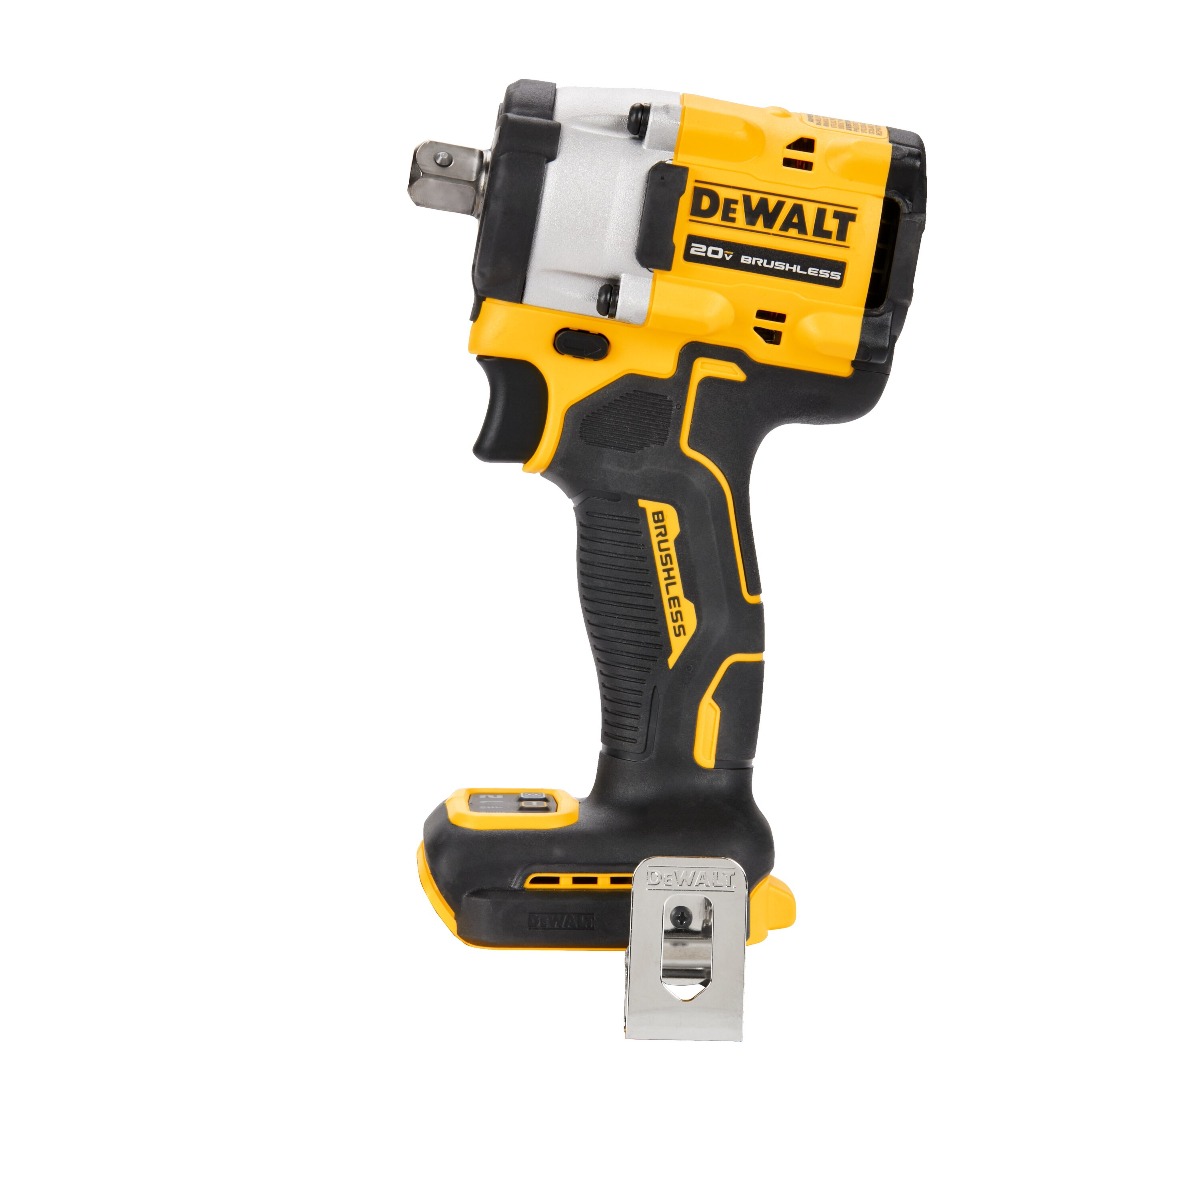 ATOMIC 20V MAX* 1/2 IN. CORDLESS IMPACT WRENCH WITH DETENT PIN ANVIL (TOOL ONLY)